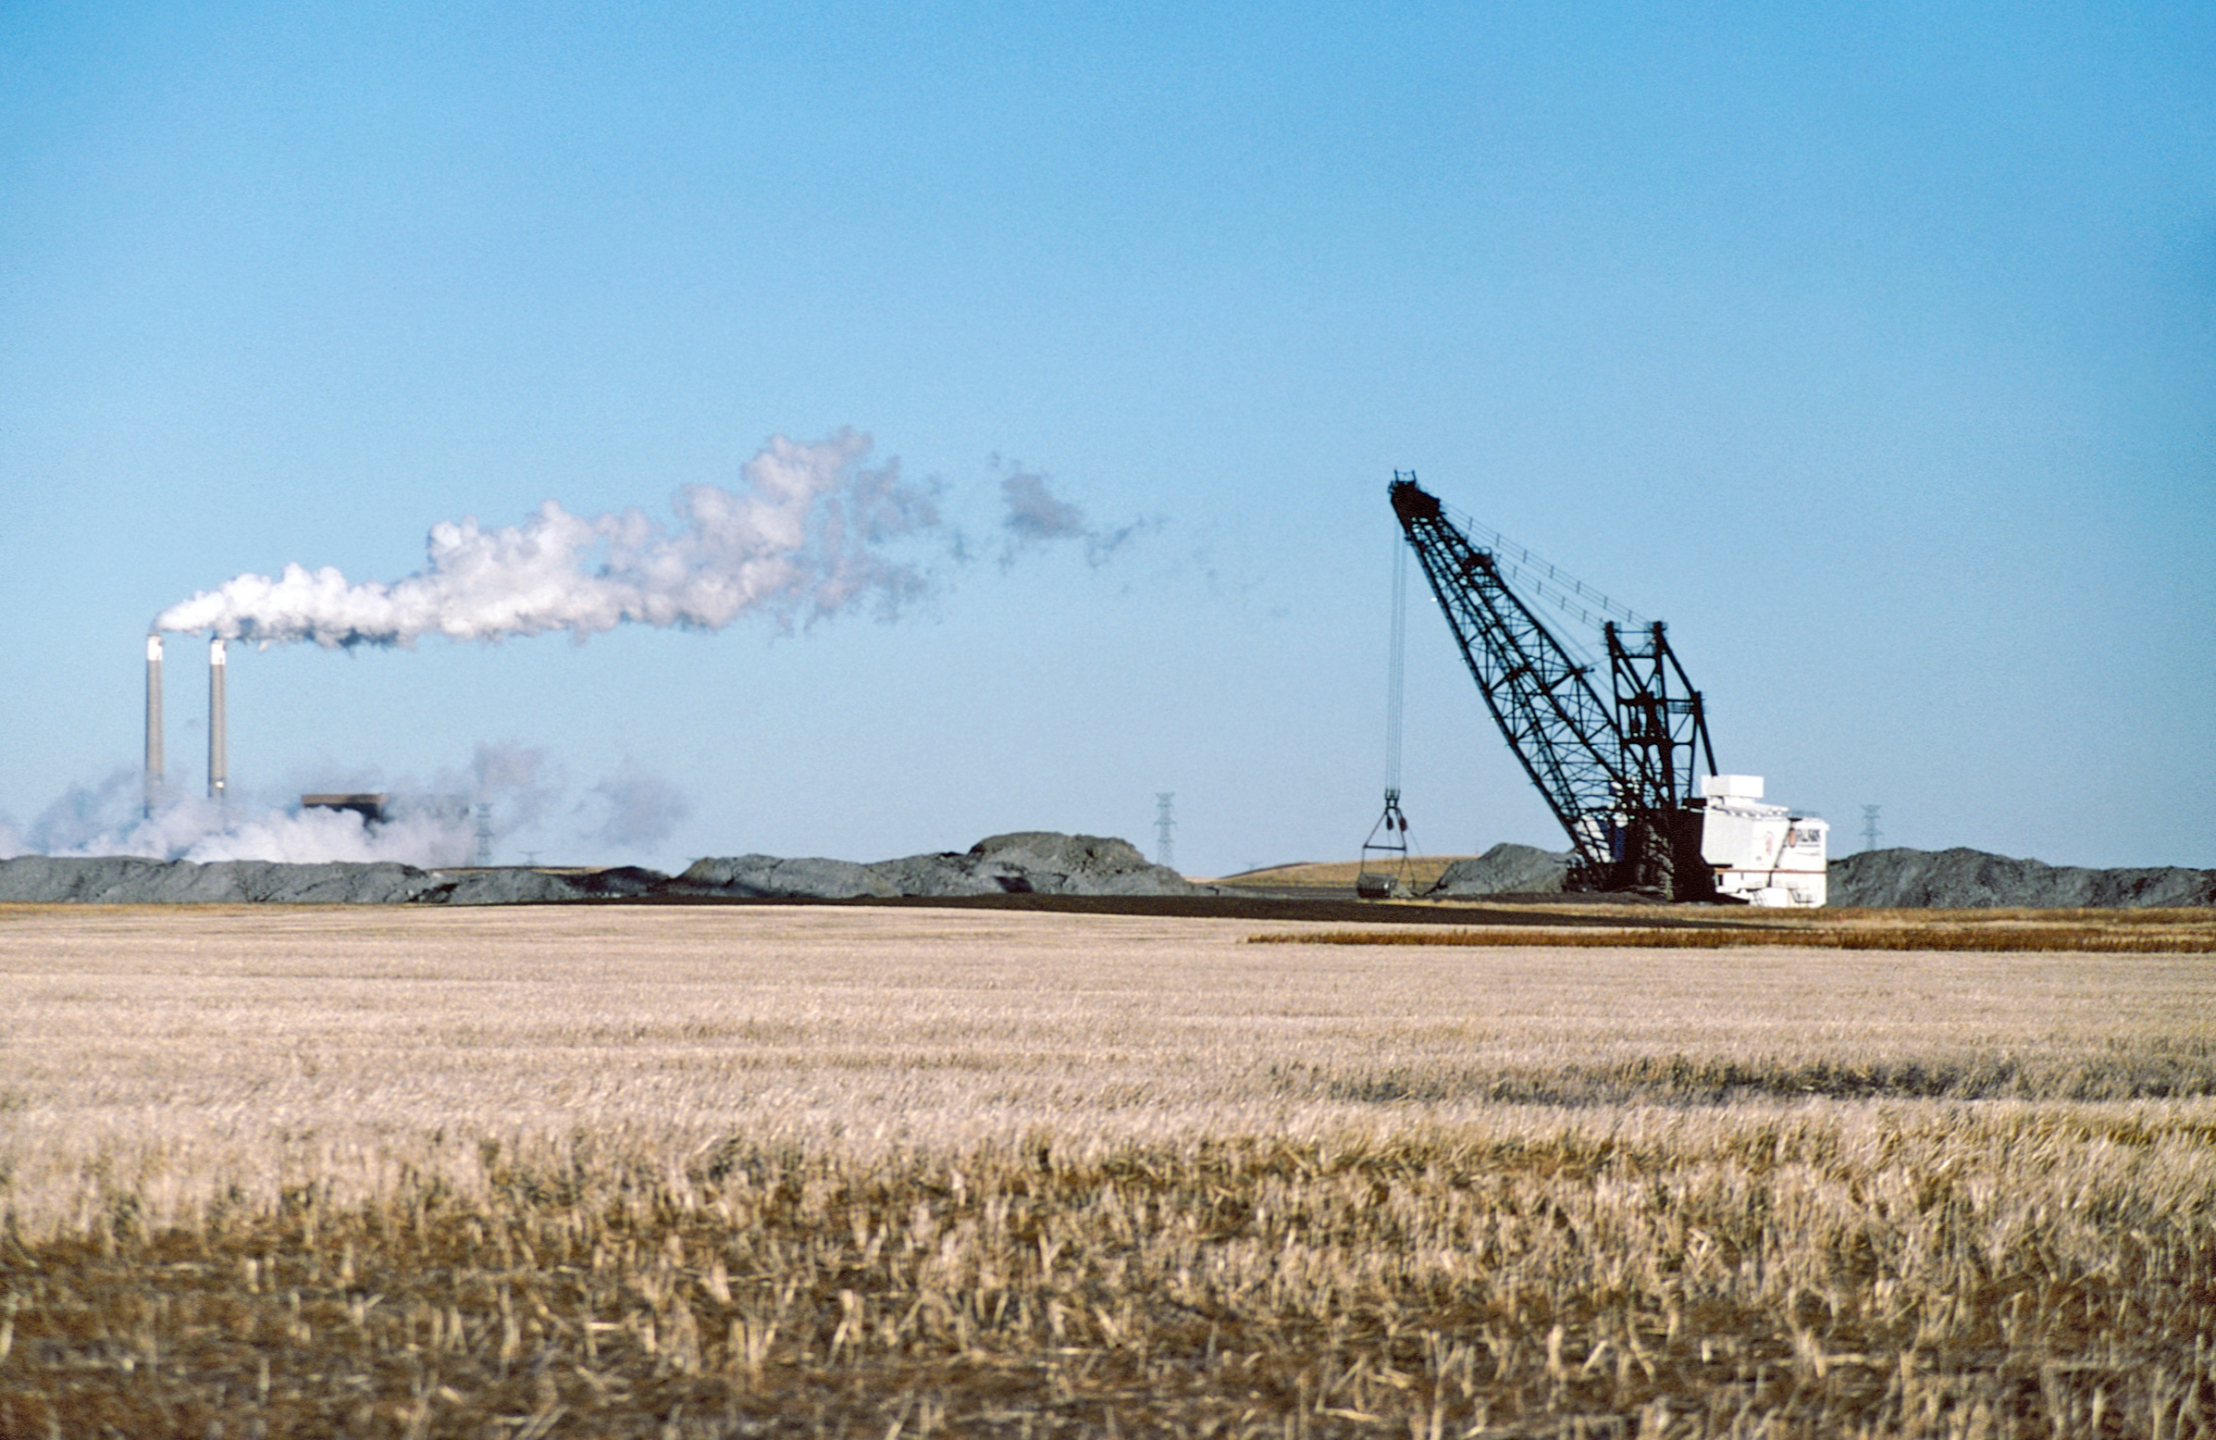 Photo of a power plant and a coal dragline next to a field.